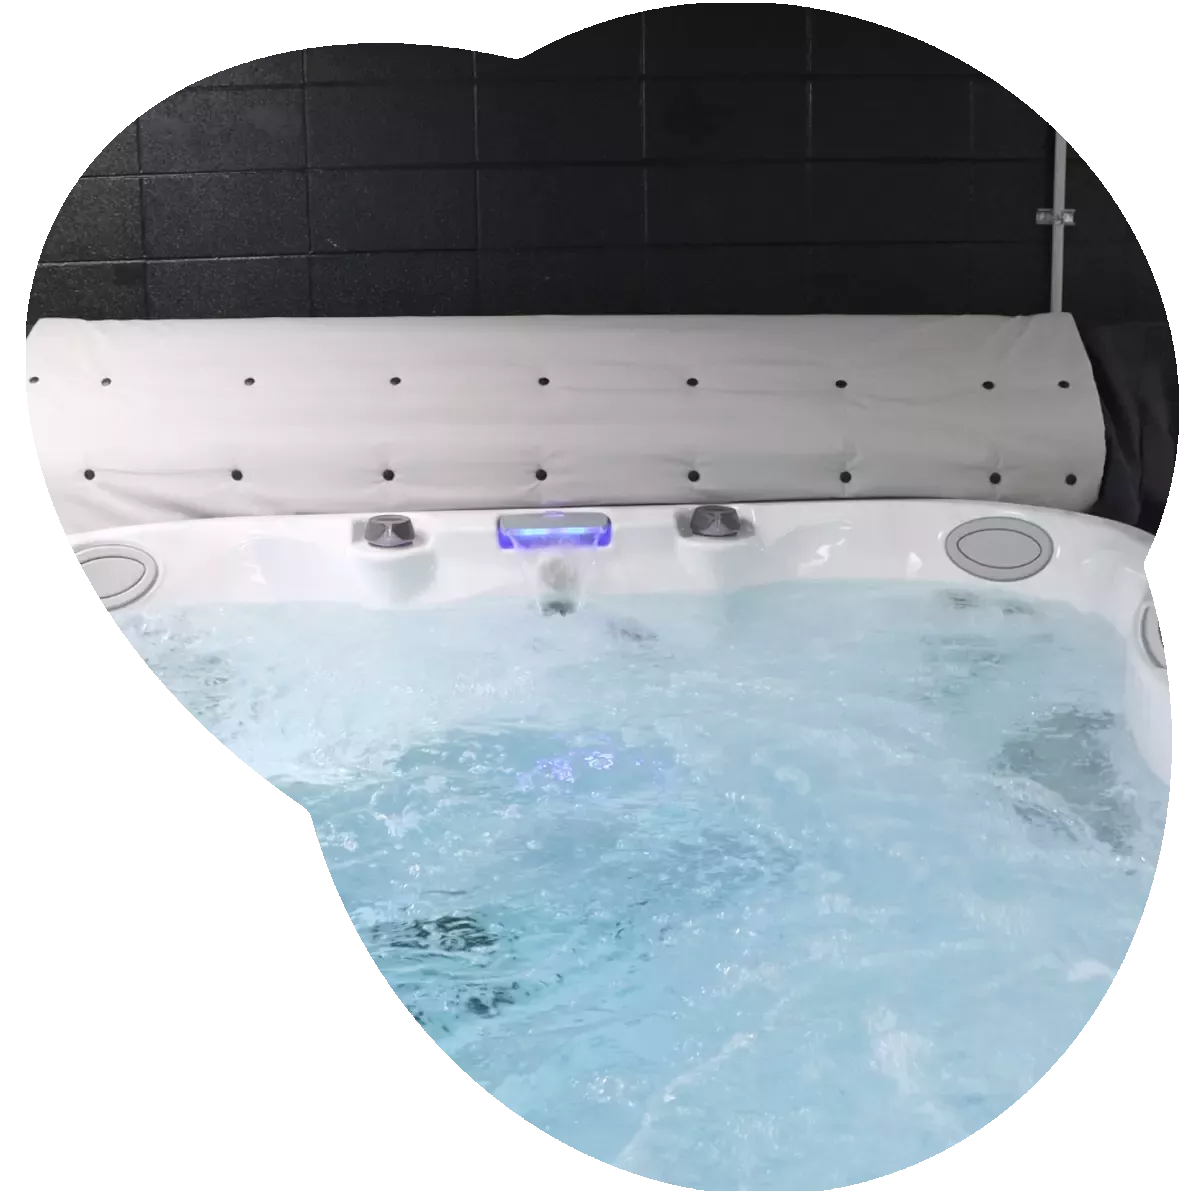 A swim spa with water in it in the All Seasons Pools & Spas show room.